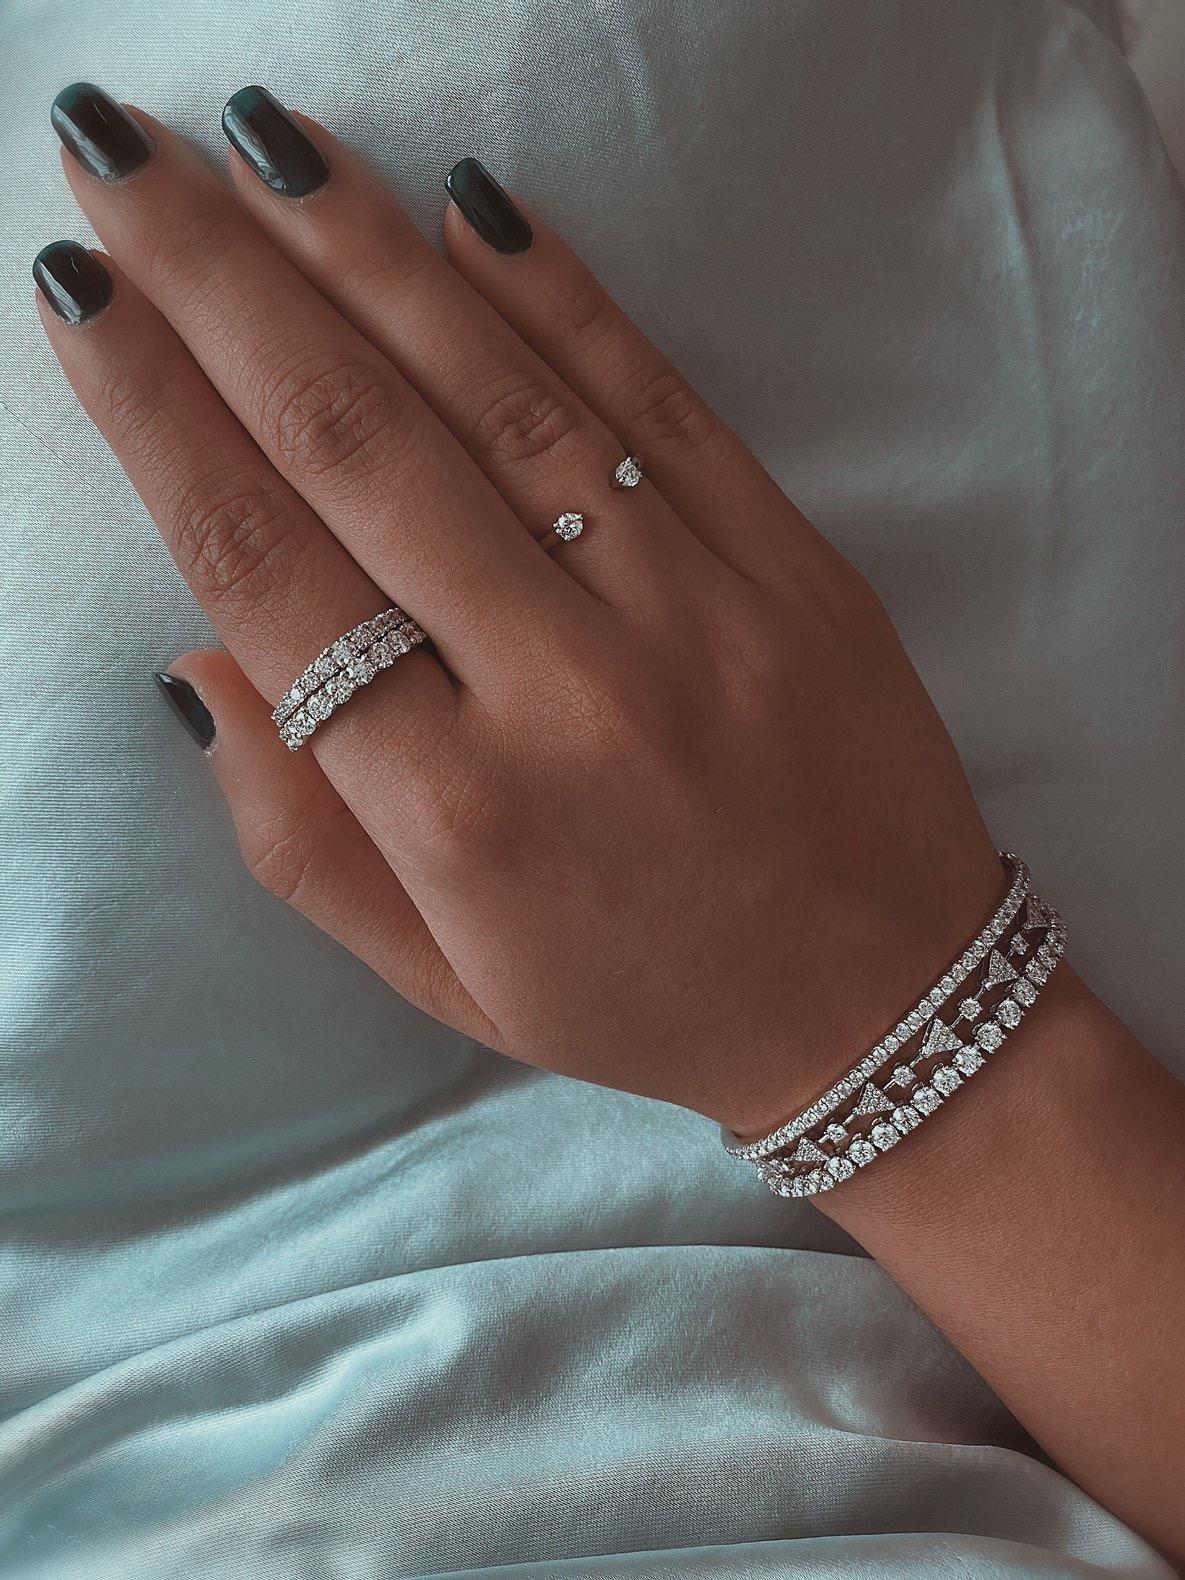 Made by nature over a period of time and under great pressure, diamonds are a beautiful reminder that all things great take time. Diamonds are a girl’s best friend because there is never a wrong occasion to accessorize with diamond jewelry. This